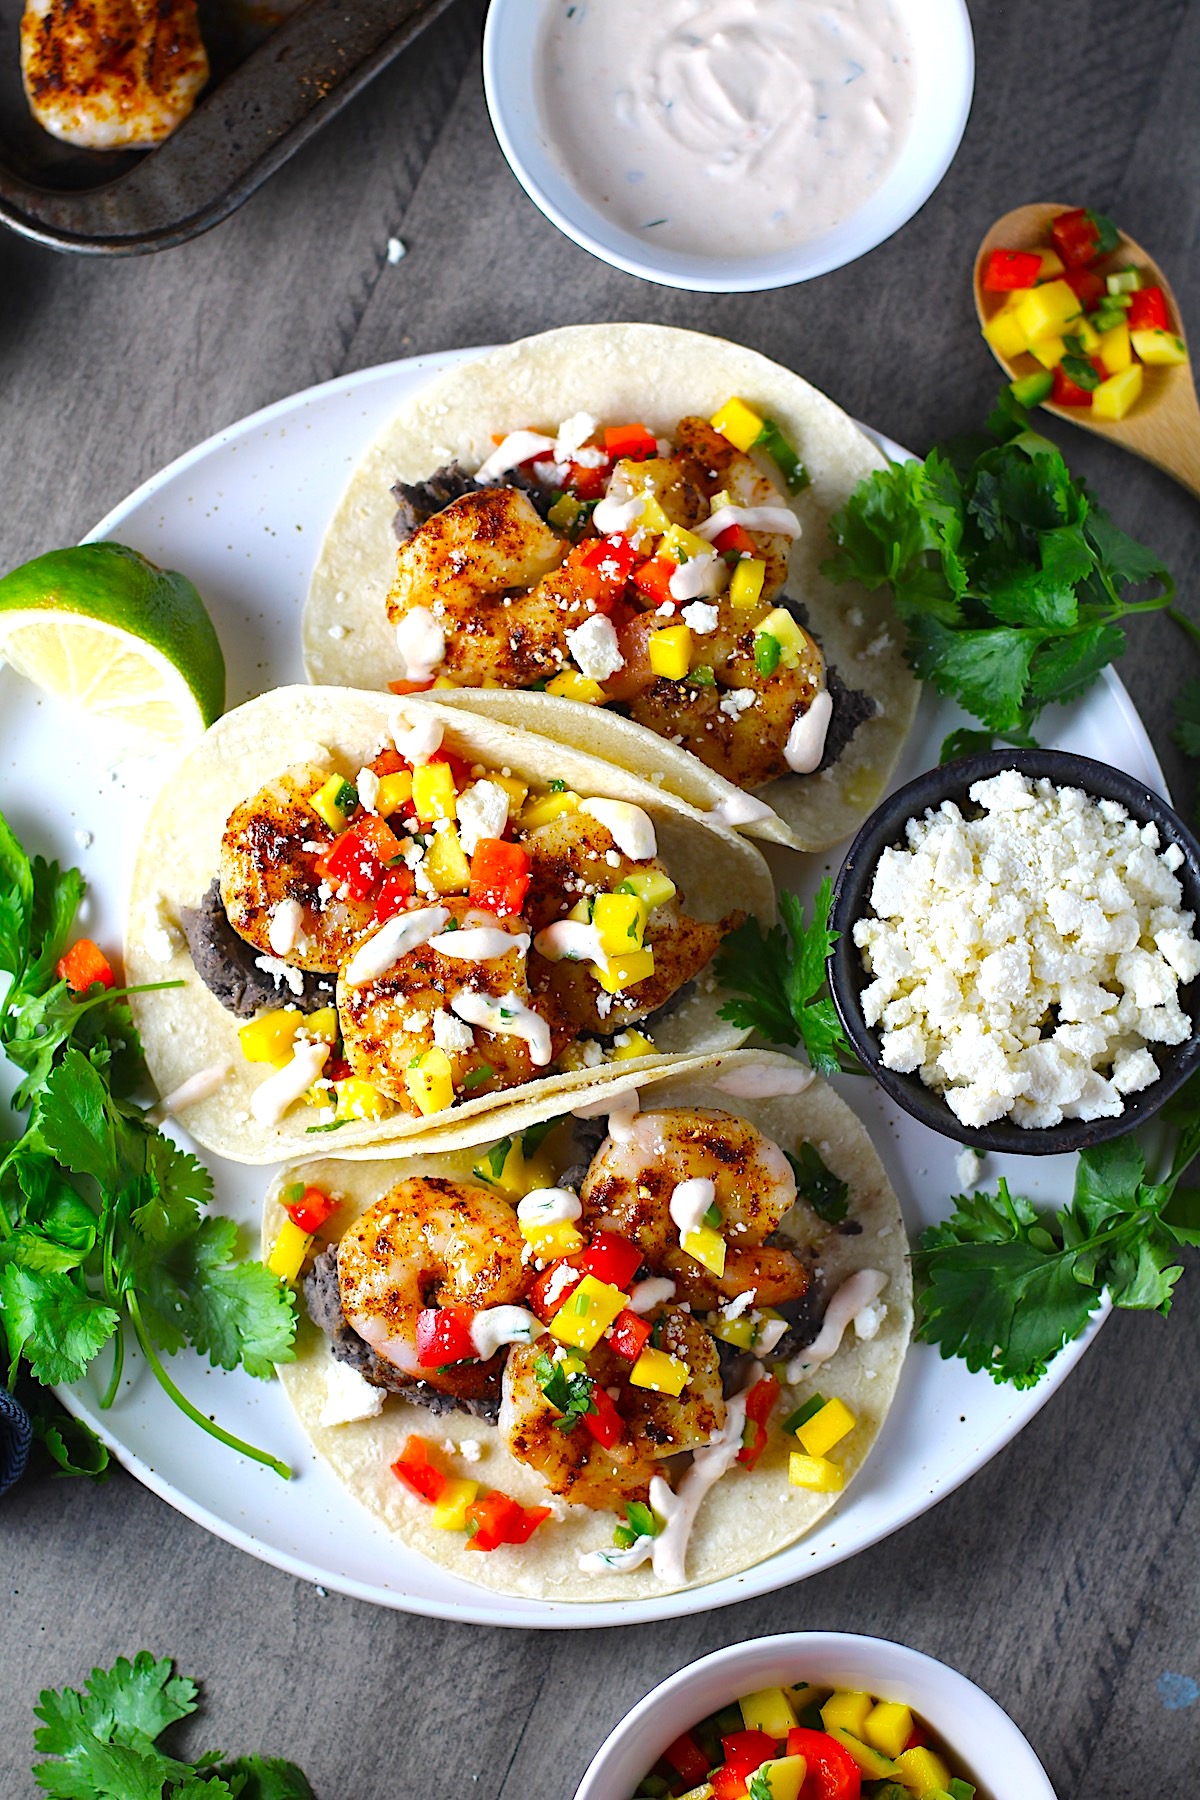 Grilled Shrimp Tacos in corn tortillas on a plate with Mango Salsa & Chipotle Crema.  On the side are bowls of cotija cheese, crema, salsa, and cilantro leaves. 